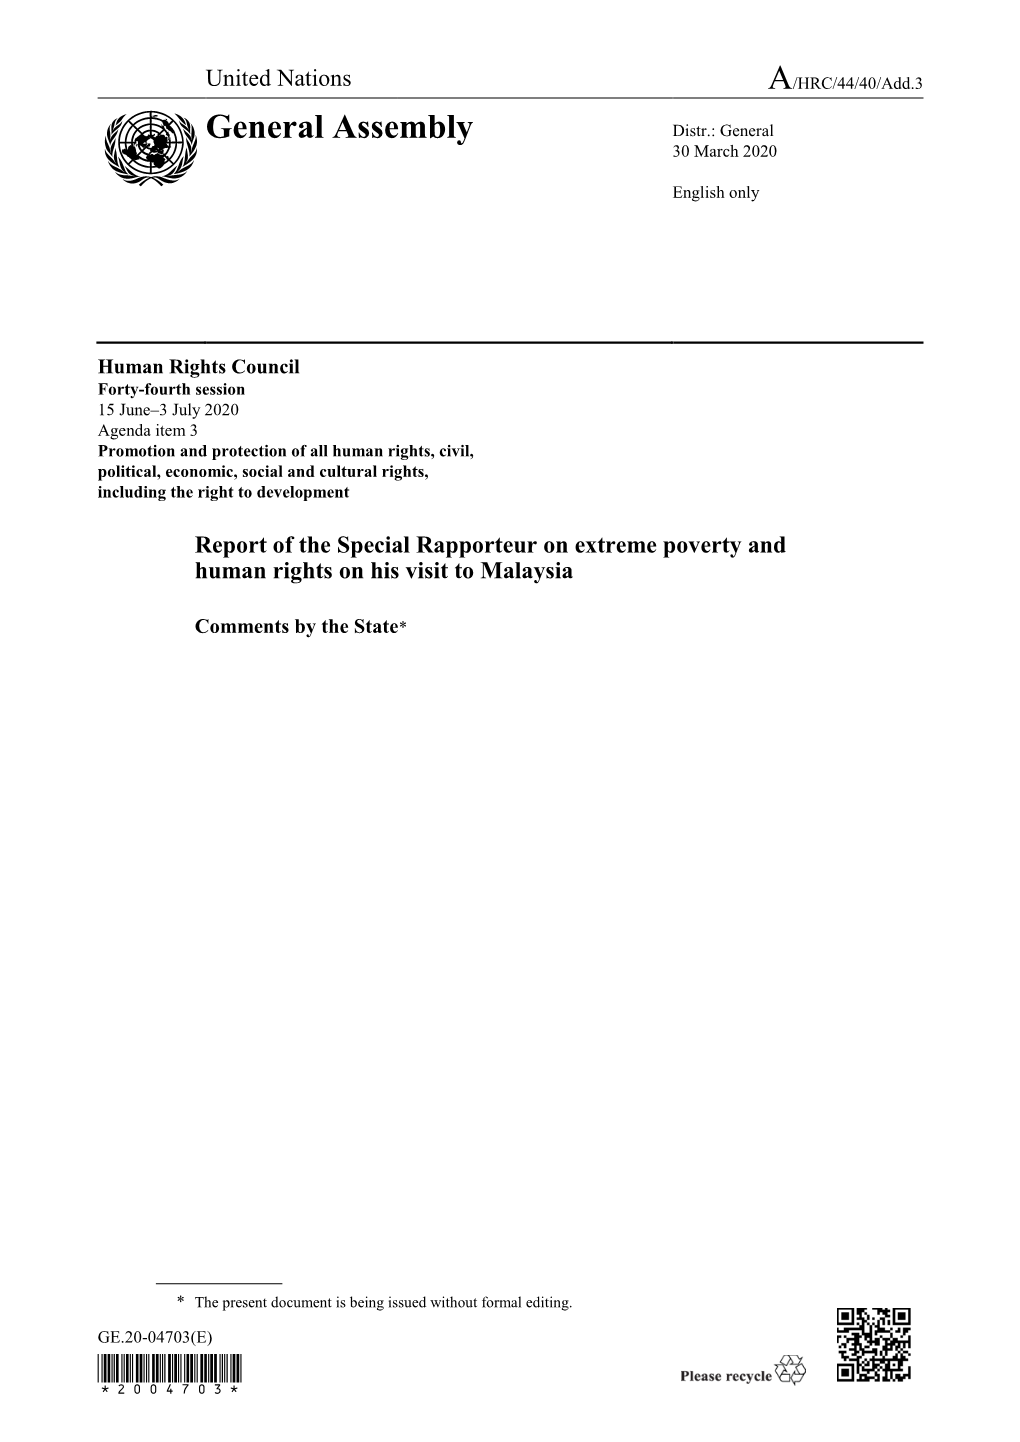 Report of the Special Rapporteur on Extreme Poverty and Human Rights on His Visit to Malaysia